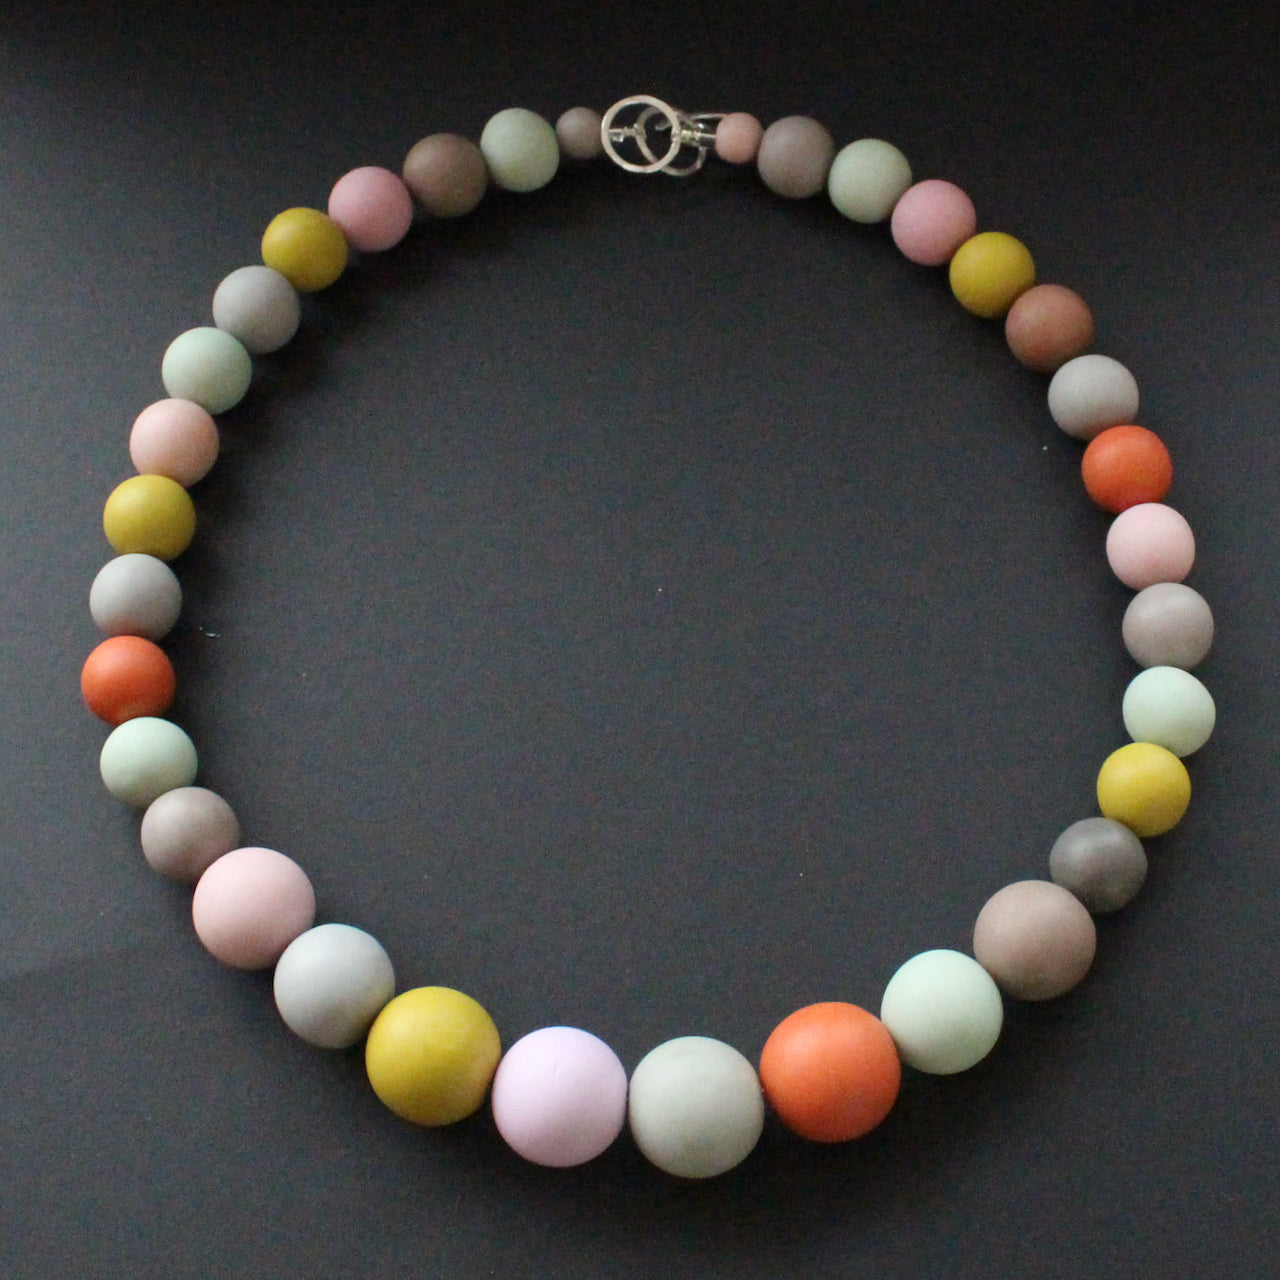 Graduated size round beaded necklace in muted earth tones by UK artist Clare Lloyd.